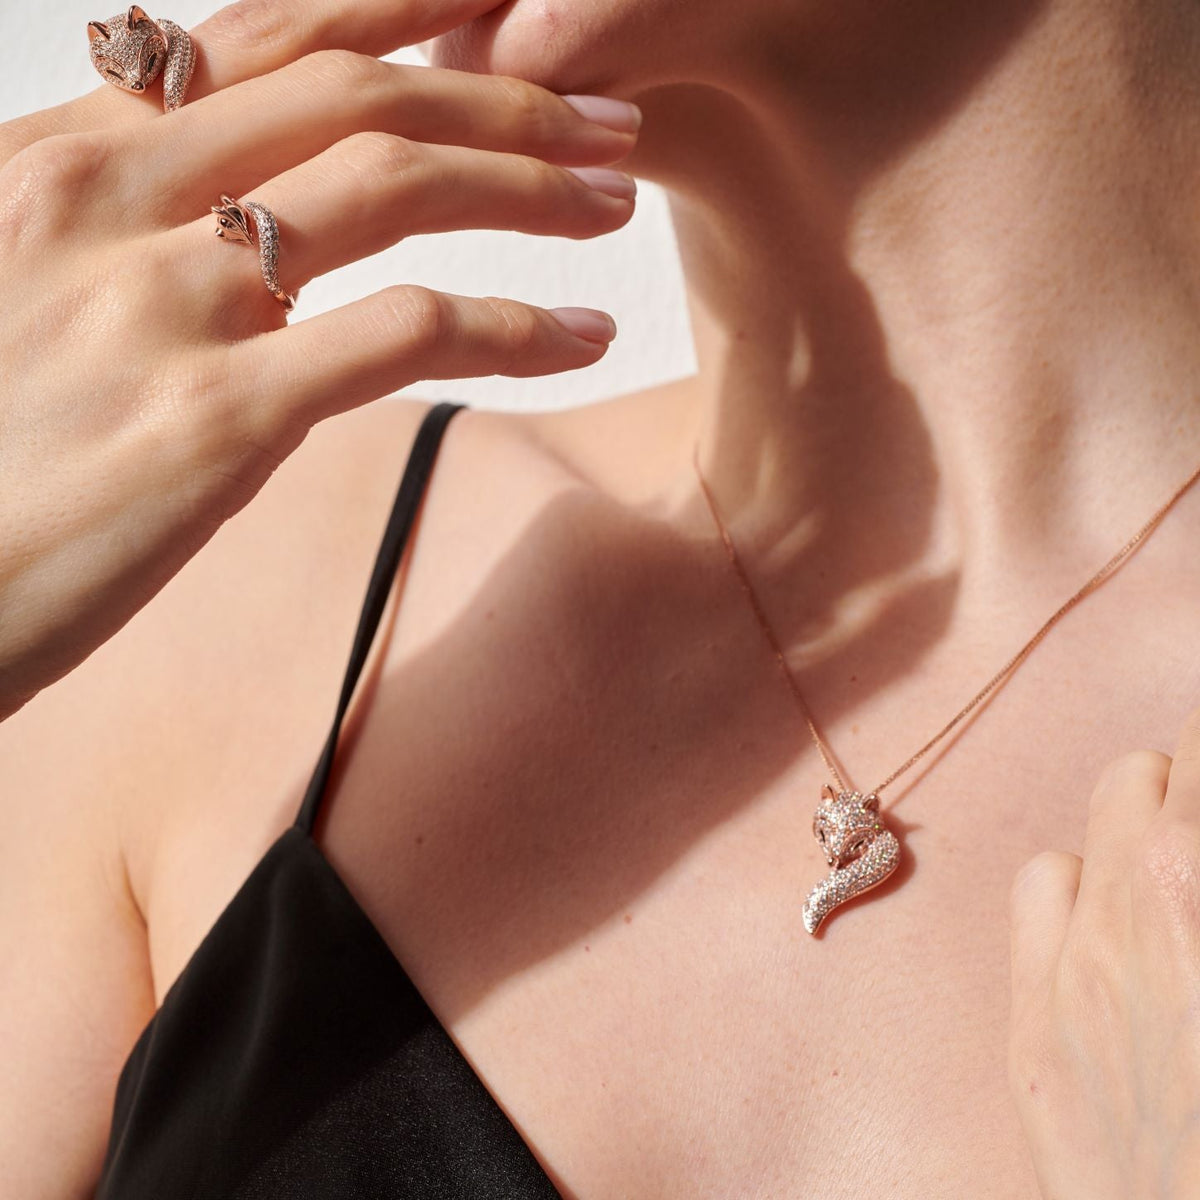 【02LIVE # link 46 - BUY 1 GET 1 free ring】Arctic Fox Pendant Necklace